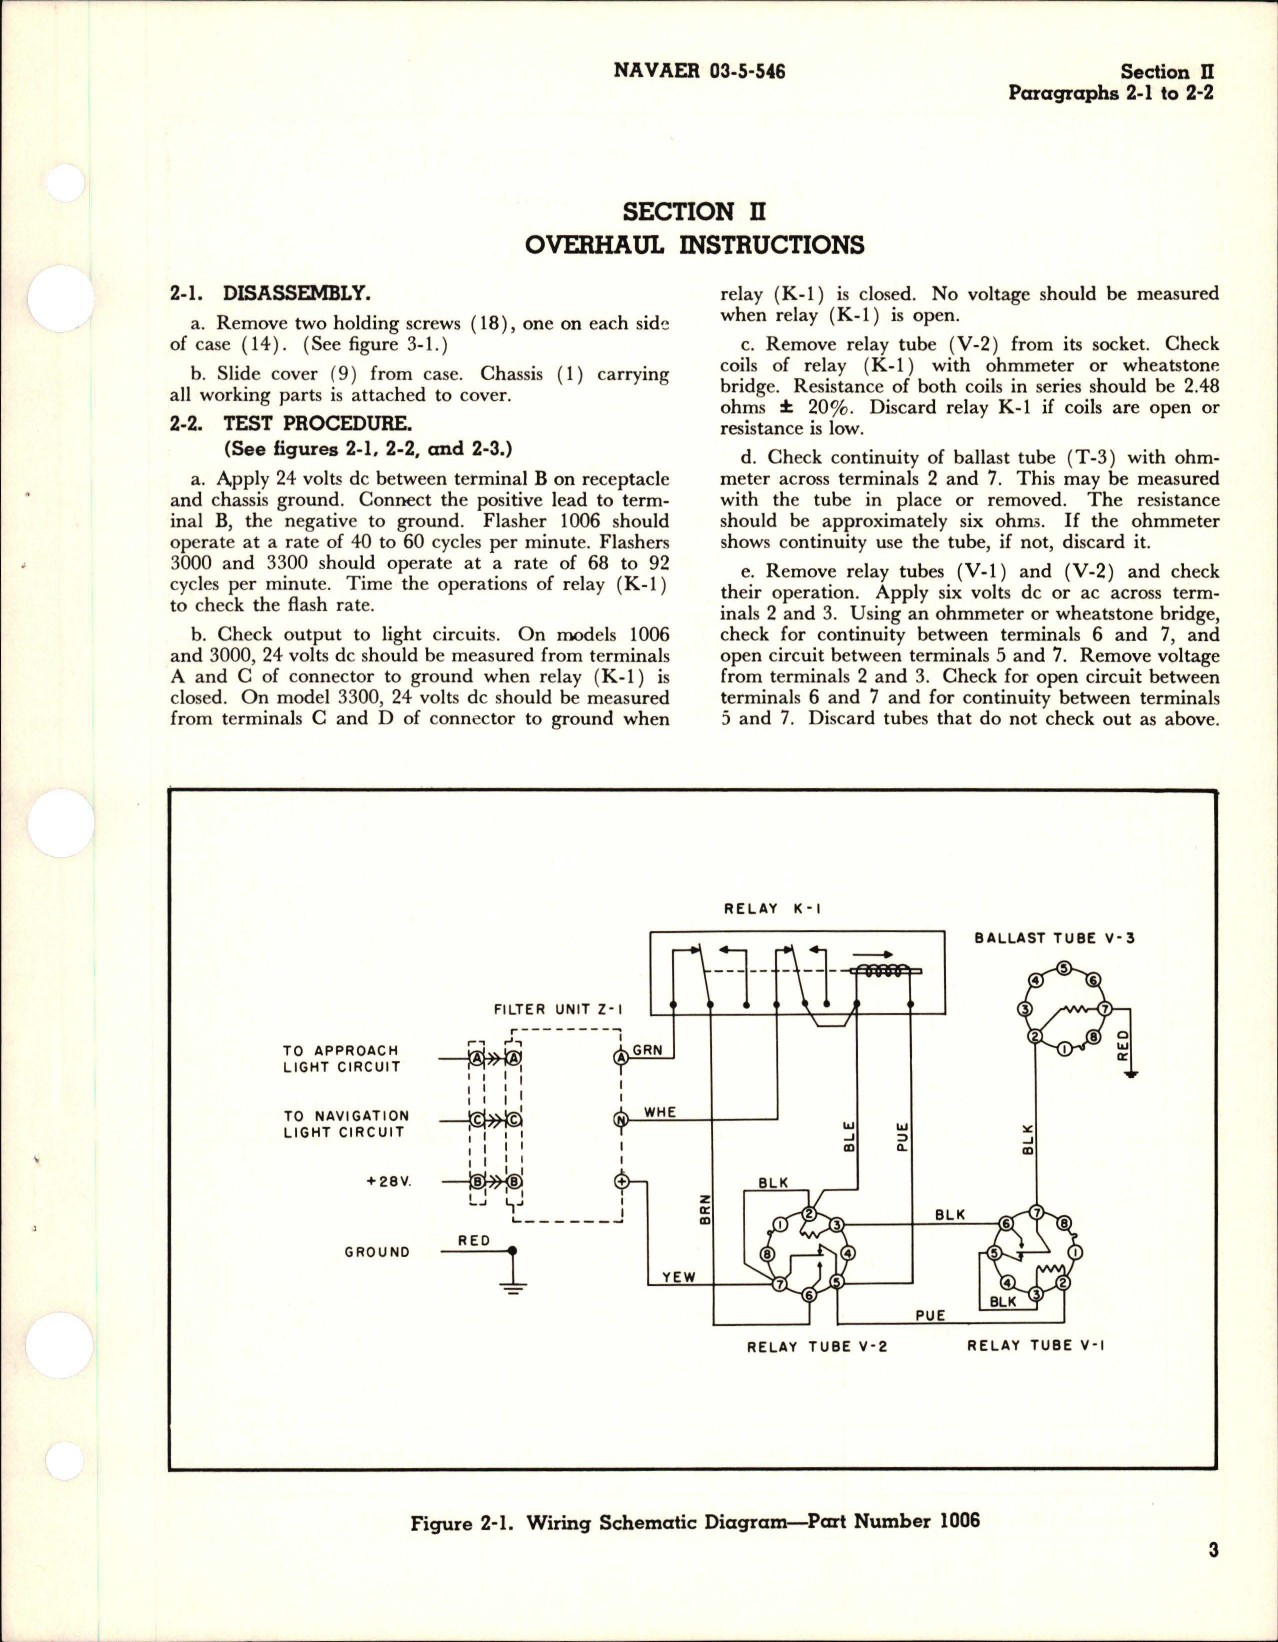 Sample page 5 from AirCorps Library document: Operation, Service and Overhaul Instructions with Parts Catalog for Exterior Lights Flasher Units - Parts 1006, 3000, and 3300